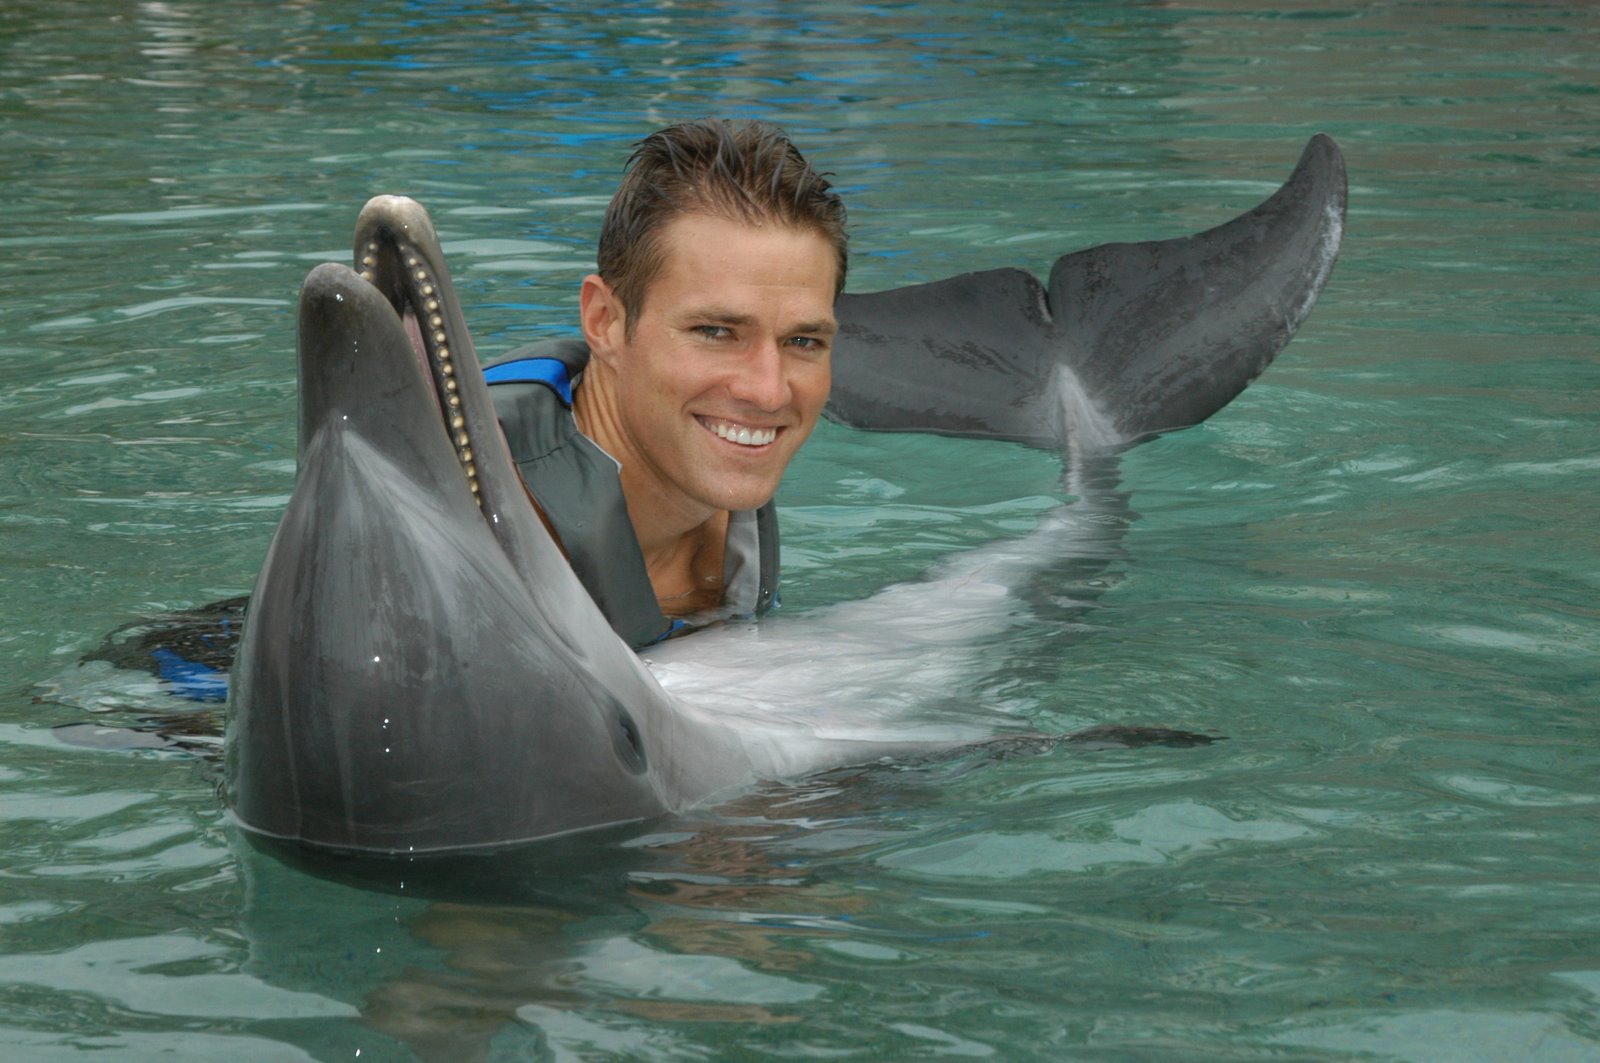 [Andy+with+dolphin.JPG]